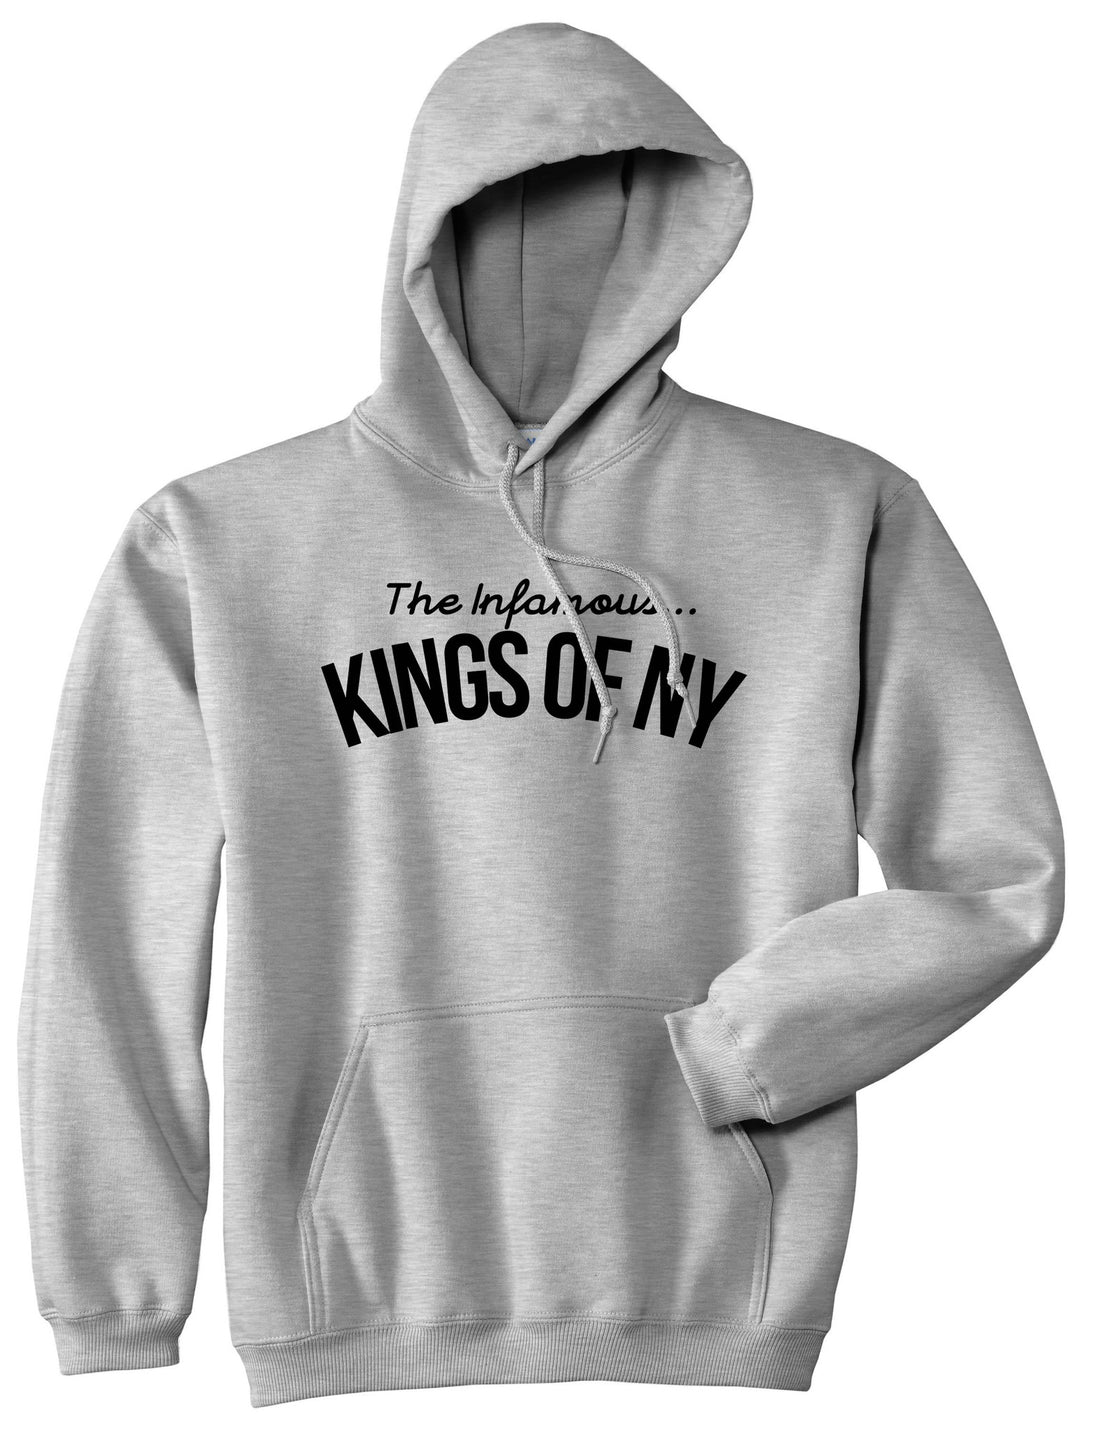 The Infamous Kings Of NY Pullover Hoodie in Grey By Kings Of NY